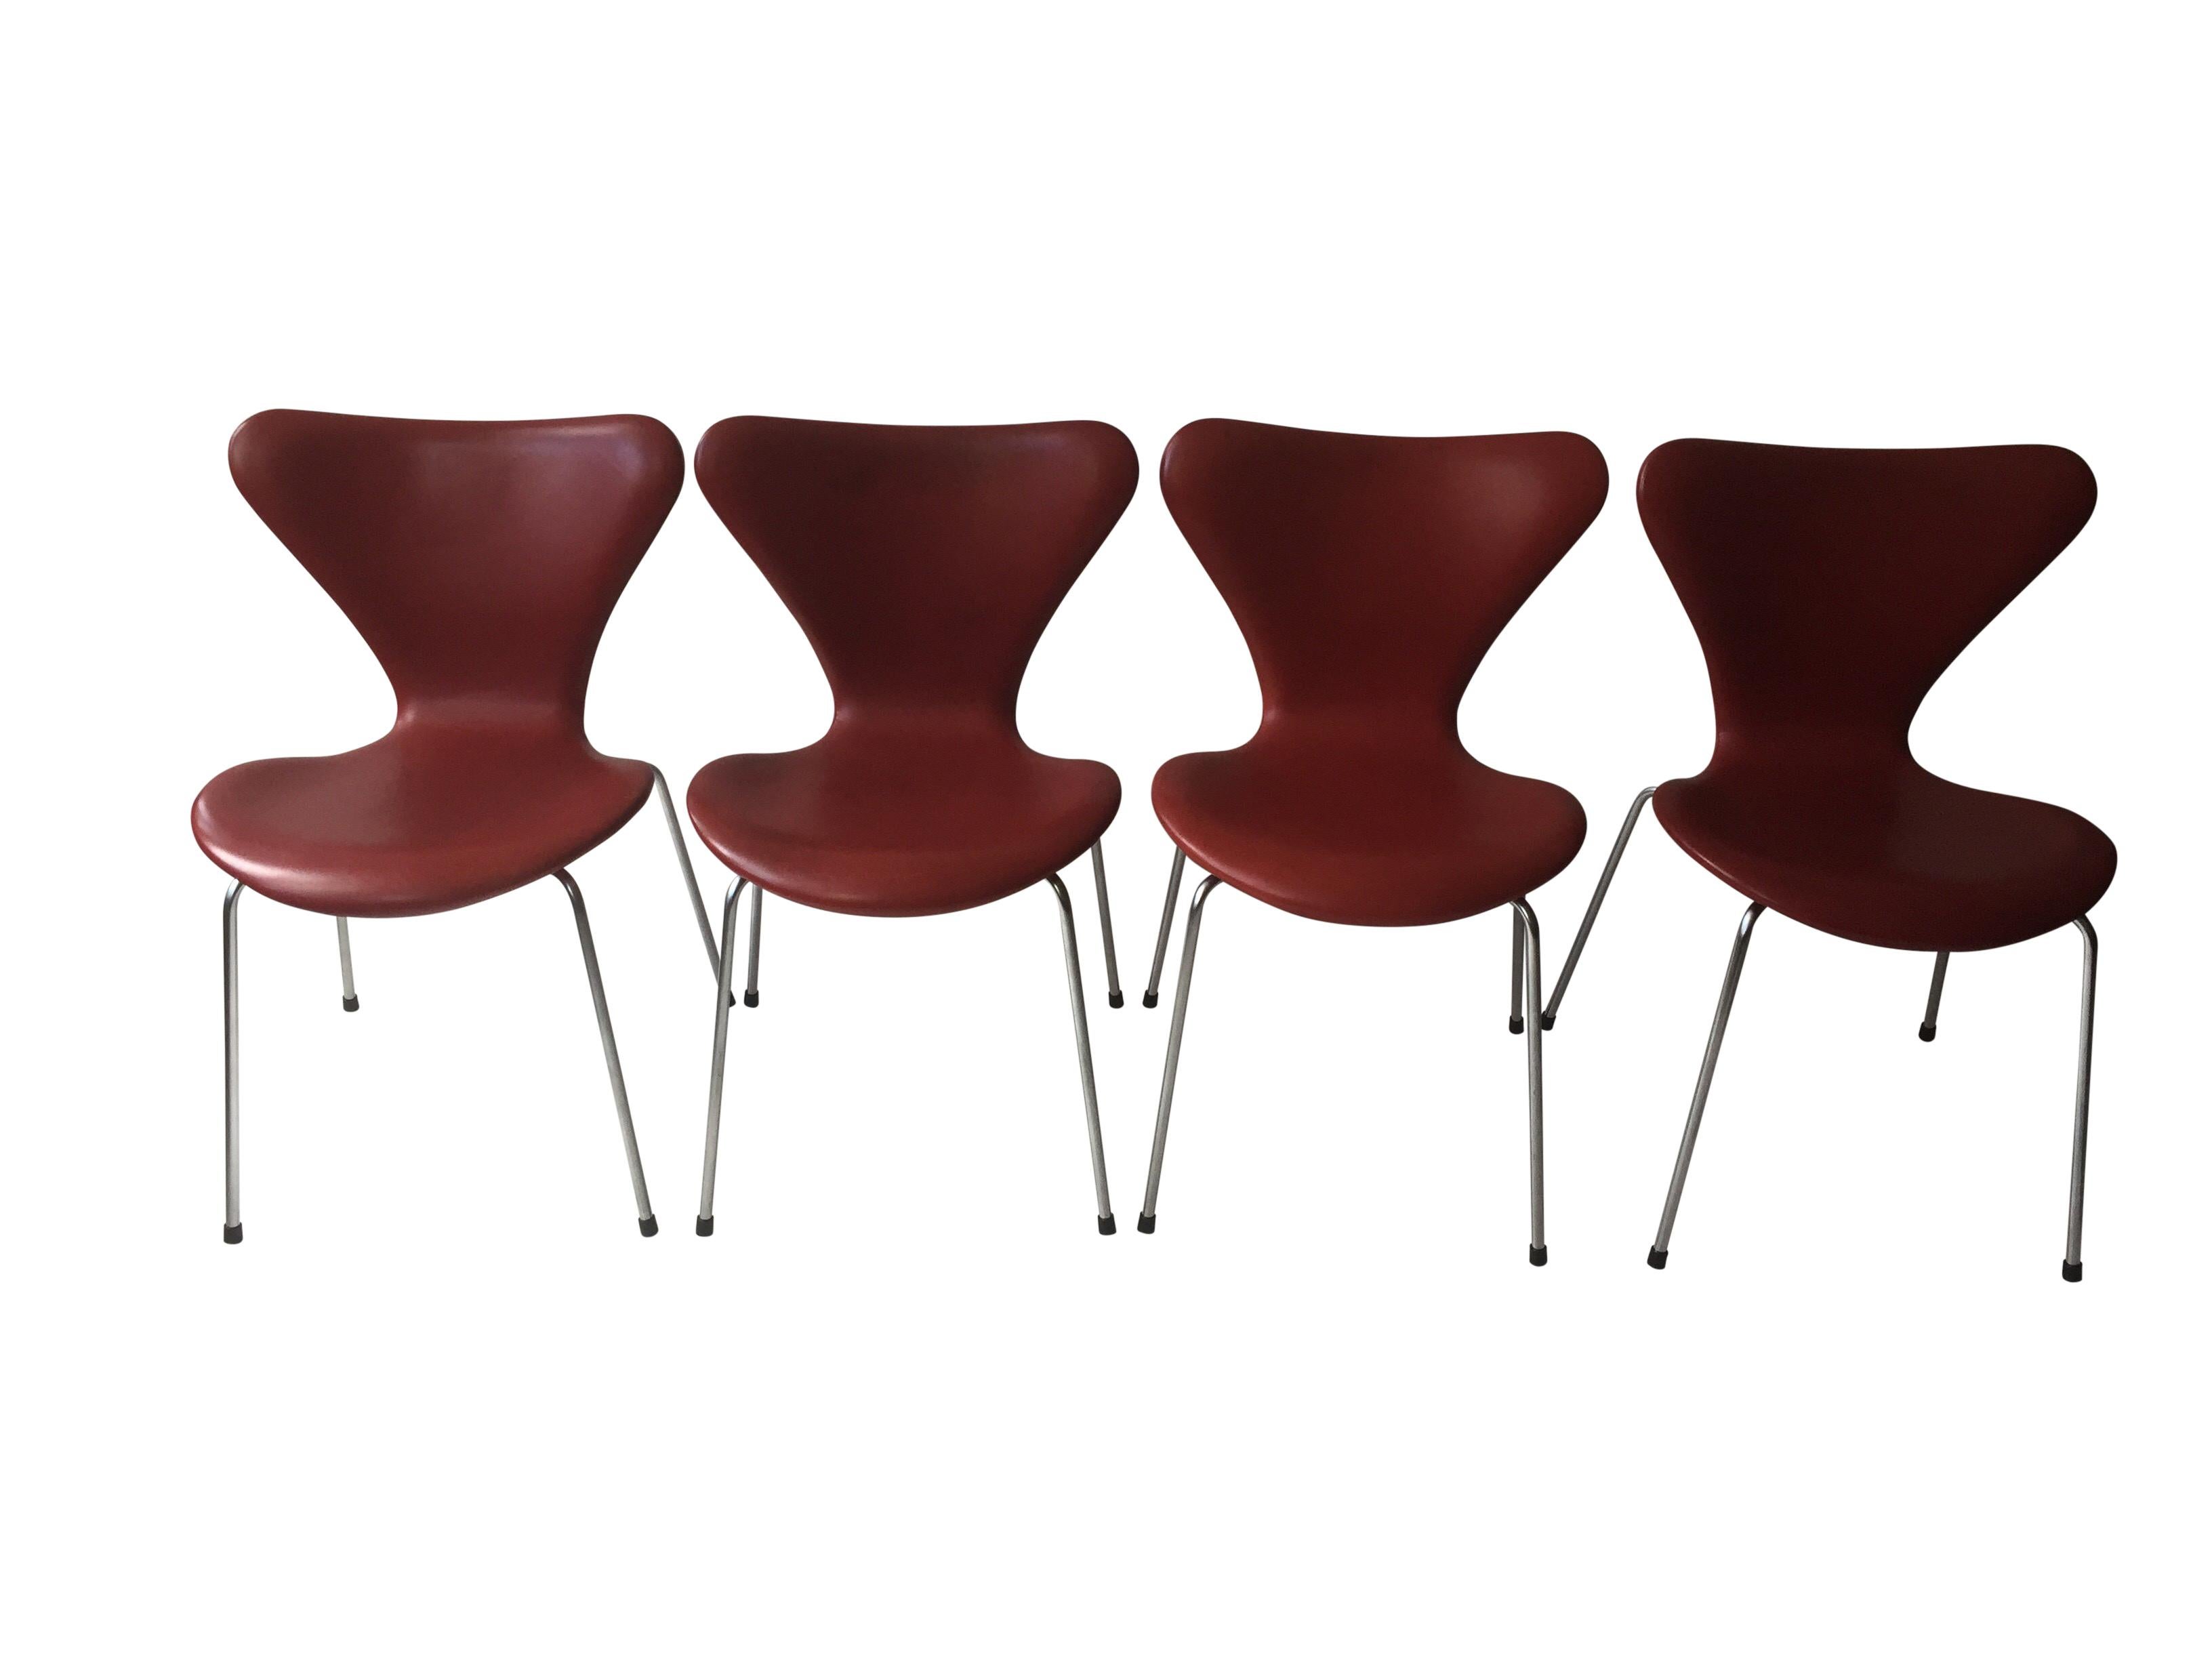 Set of Eight Danish Dining Chairs in Indian Red Leather by Arne Jacobsen 1960s For Sale 2